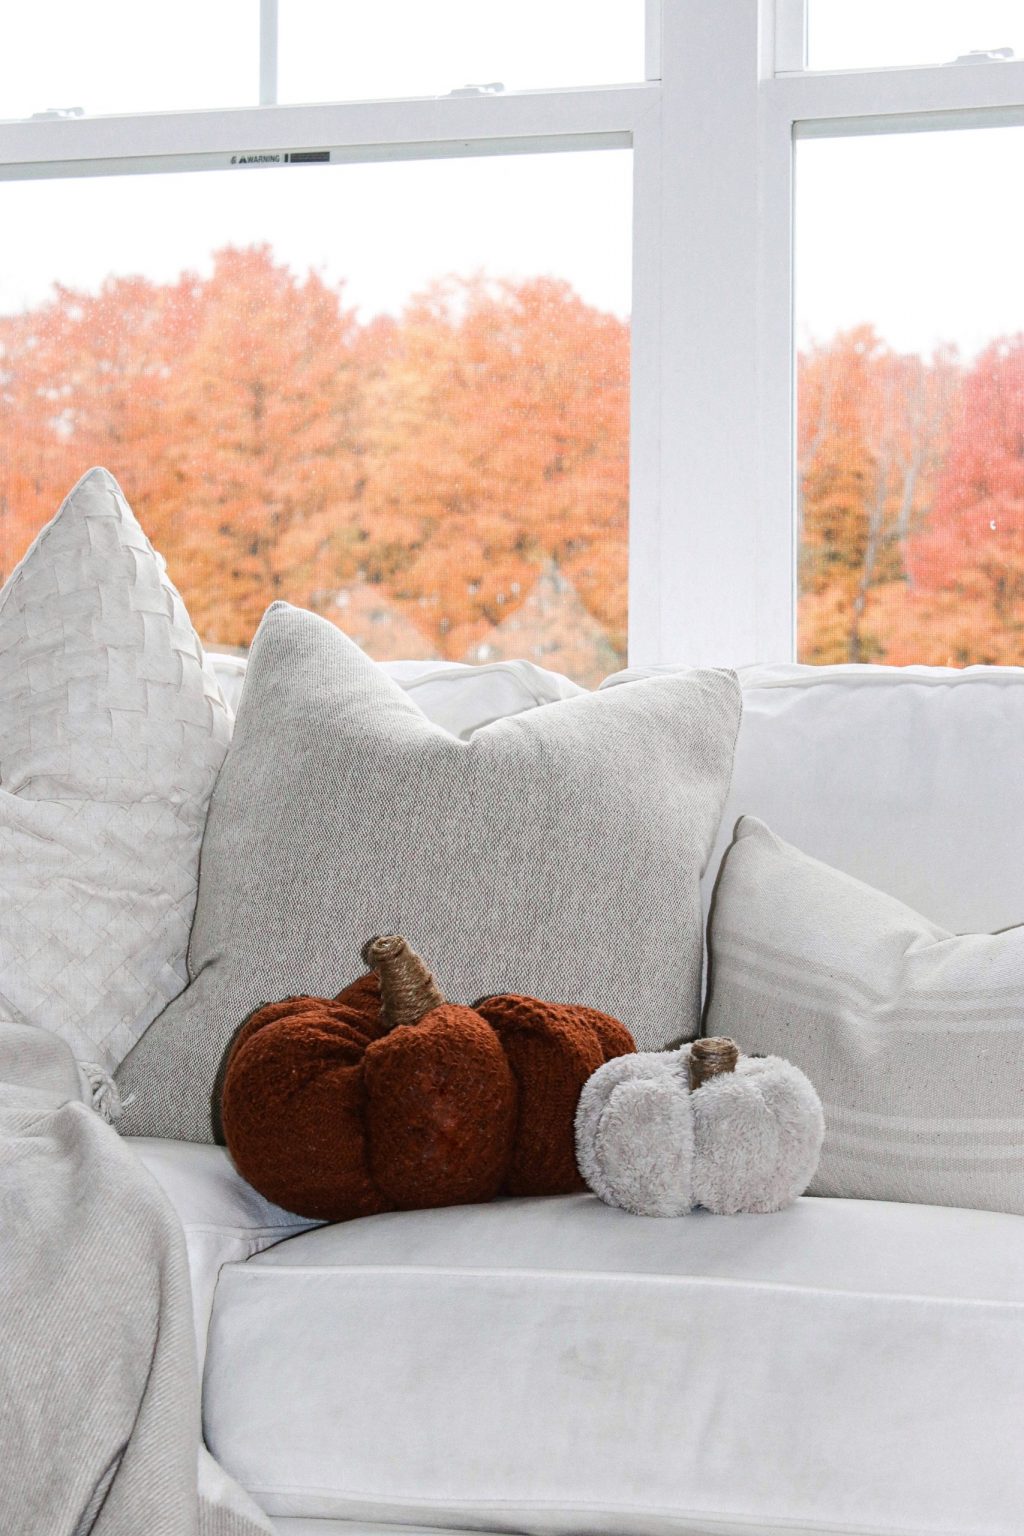 How to Transform Your Home for Fall